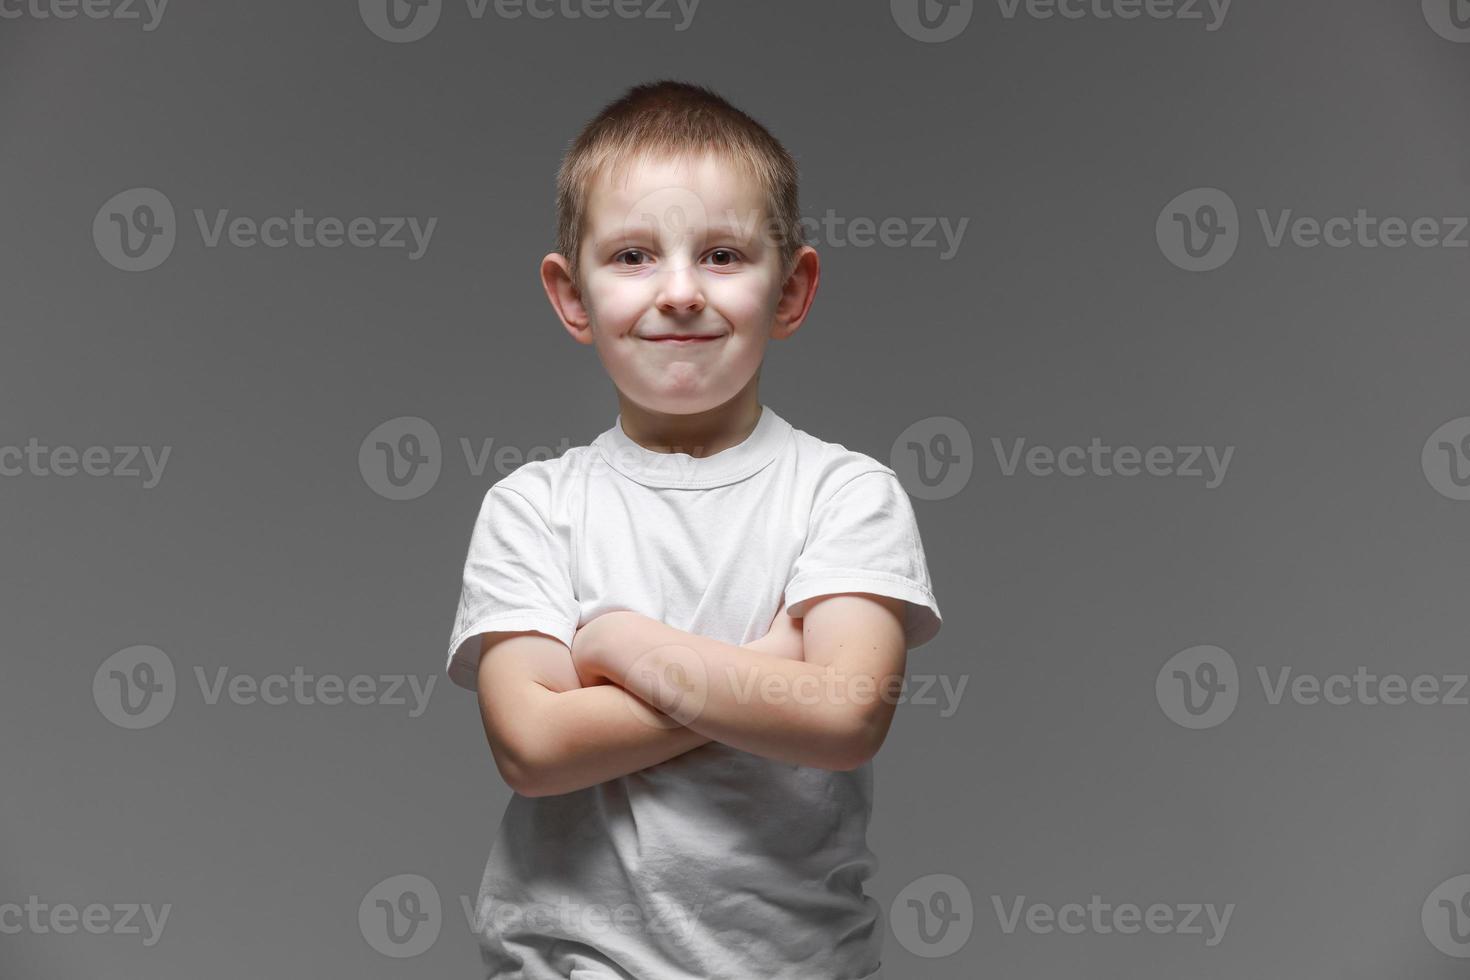 Portrait of happy little boy in white t-shirt smiling on gray background looking at camera in studio setting. Portrait of fashionable male child. photo